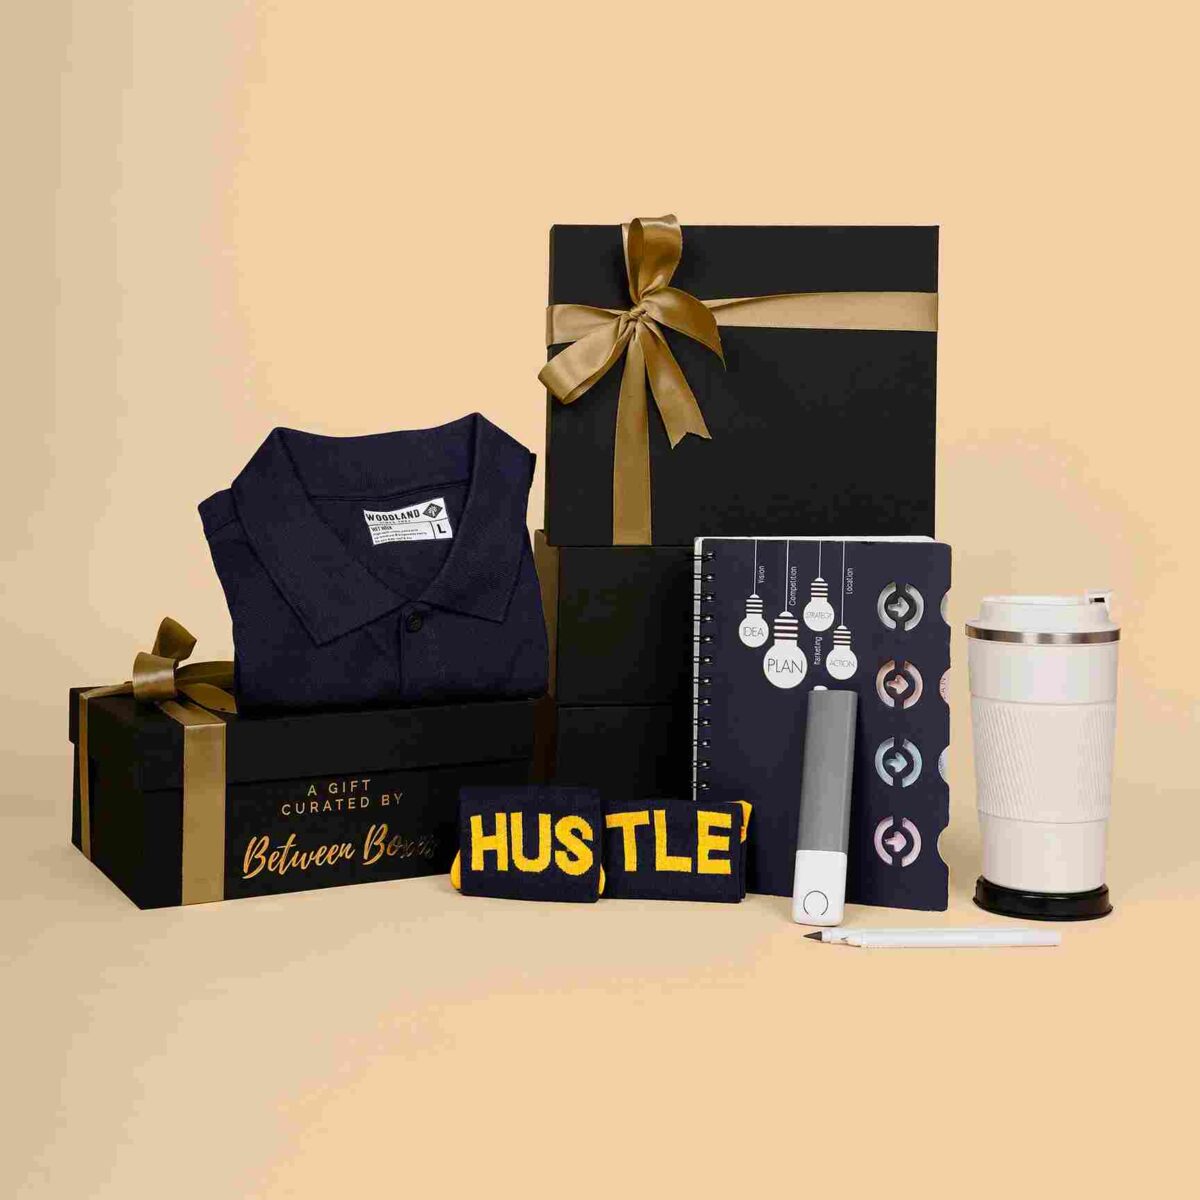 Personalized Corporate Gifts Hampers: Making Business Relationships Meaningful